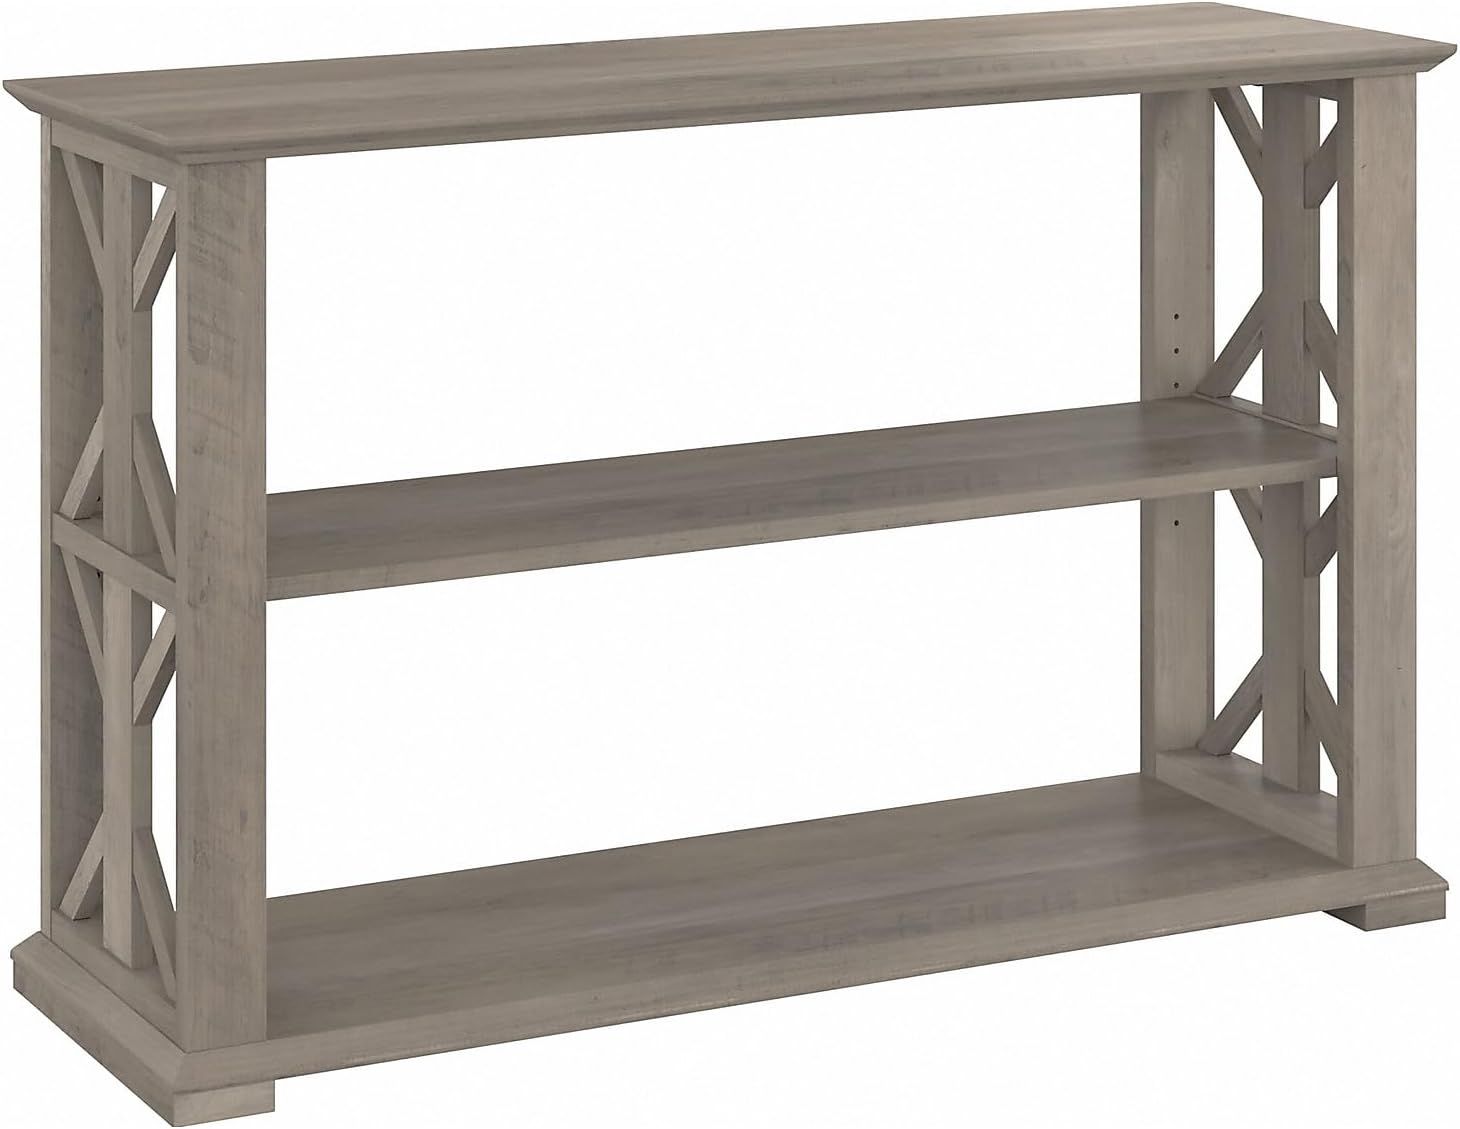 Gray Rectangular Wood Console Table with Storage Shelves